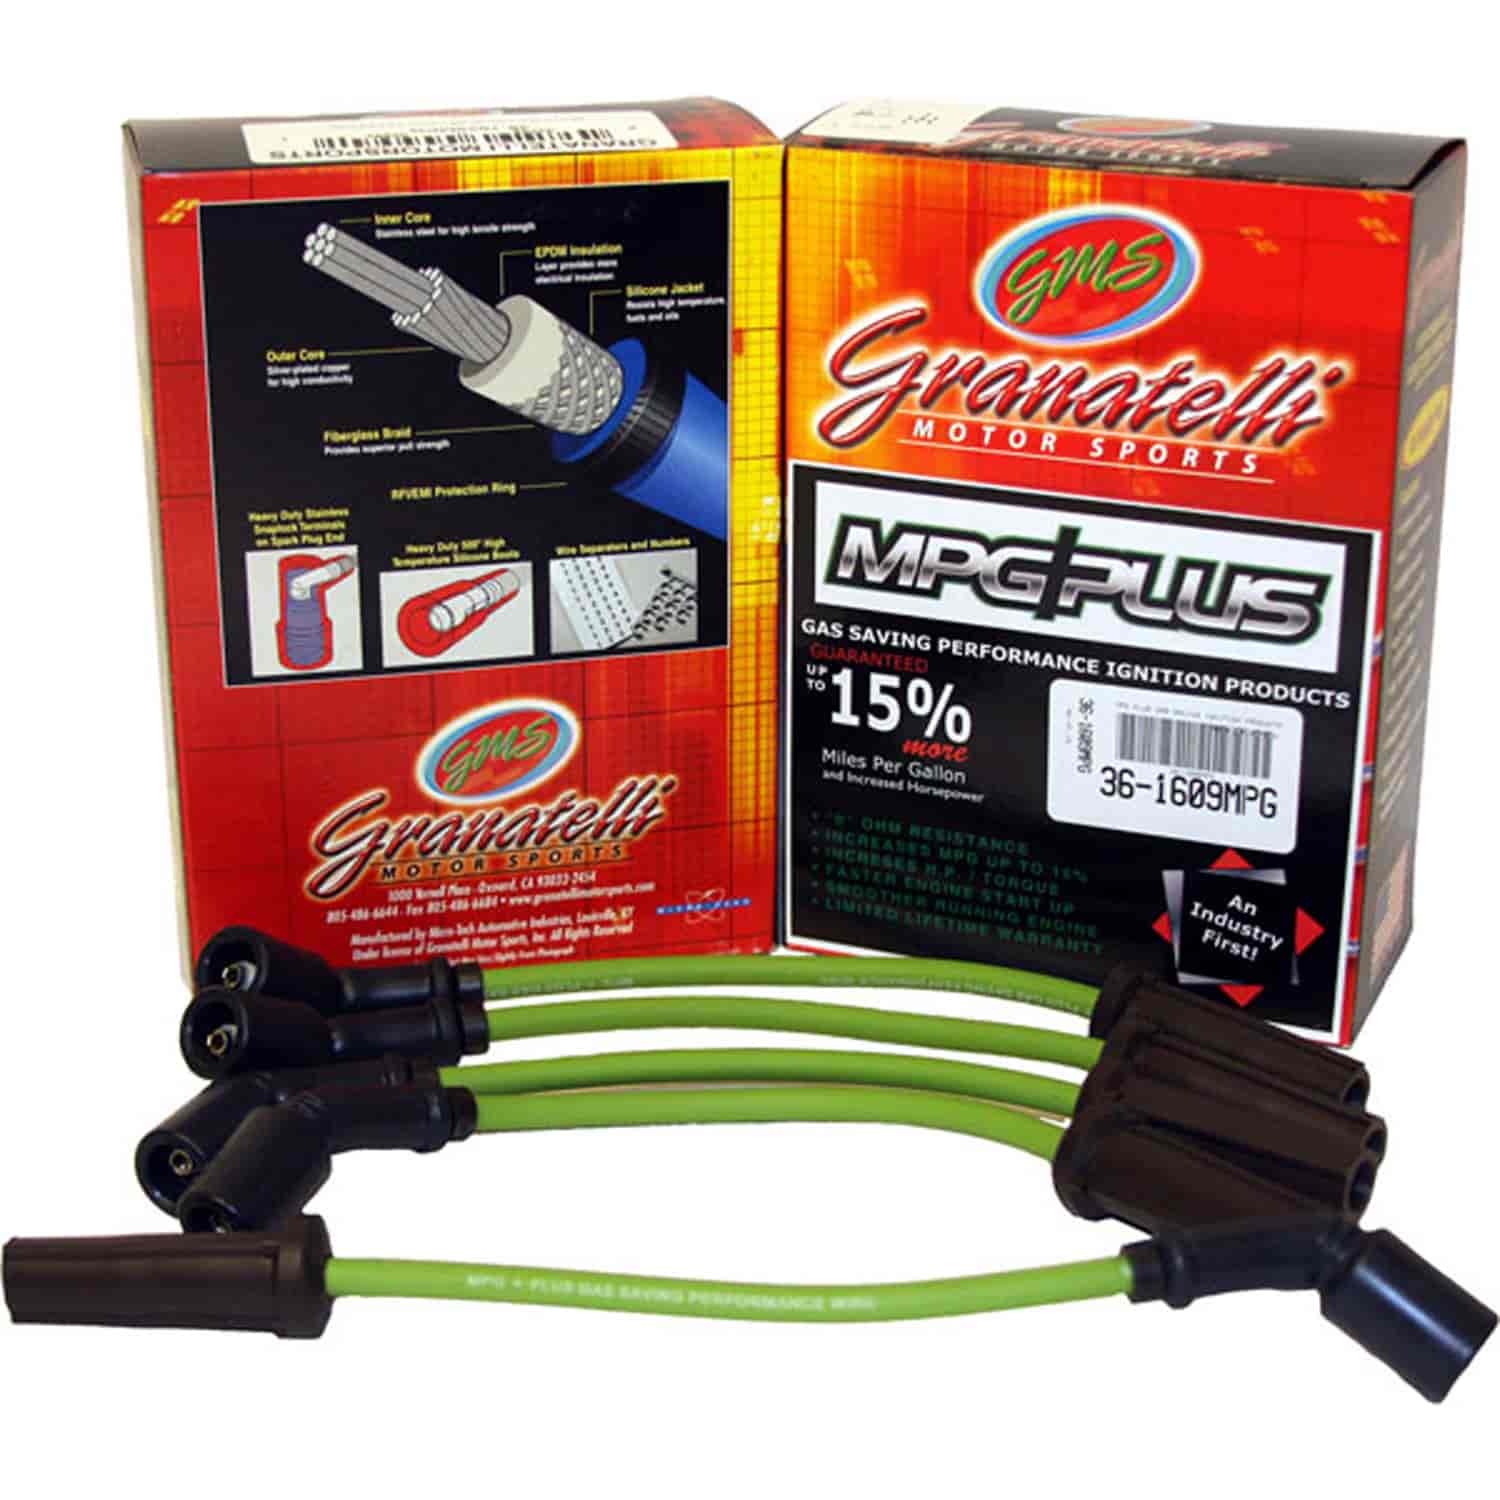 MPG Wires LEXUS GS 300 6CYL 3.0L 3 WIRES COIL ON PLUG 98-05